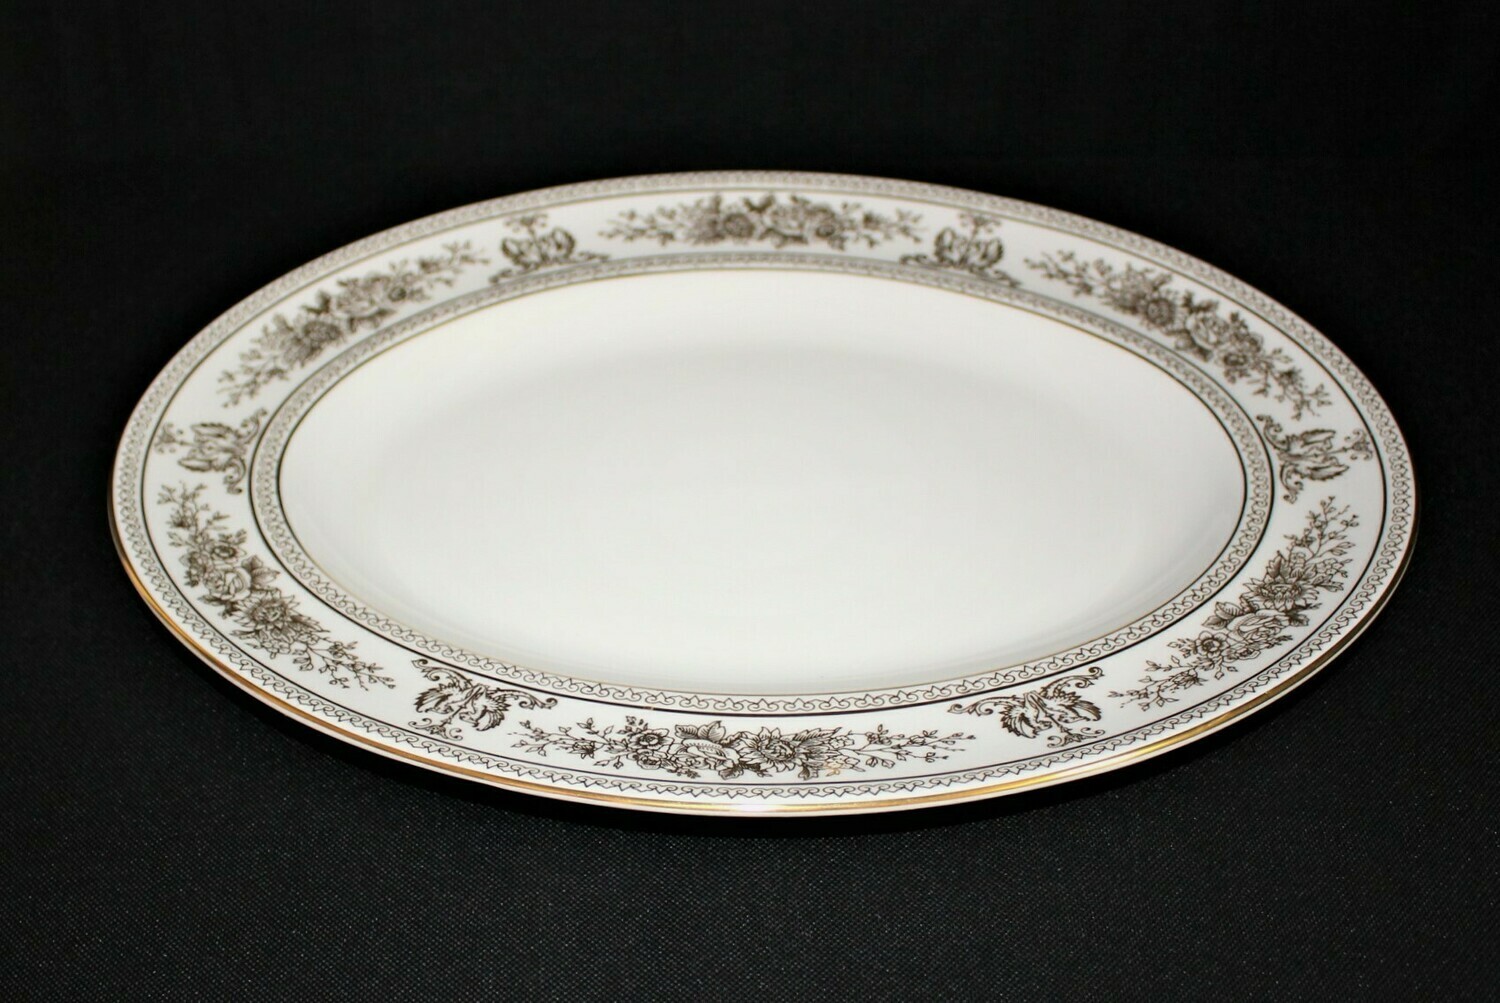 Wedgwood Columbia 14" Oval Serving Platter Plate White w/Gold Bone China England